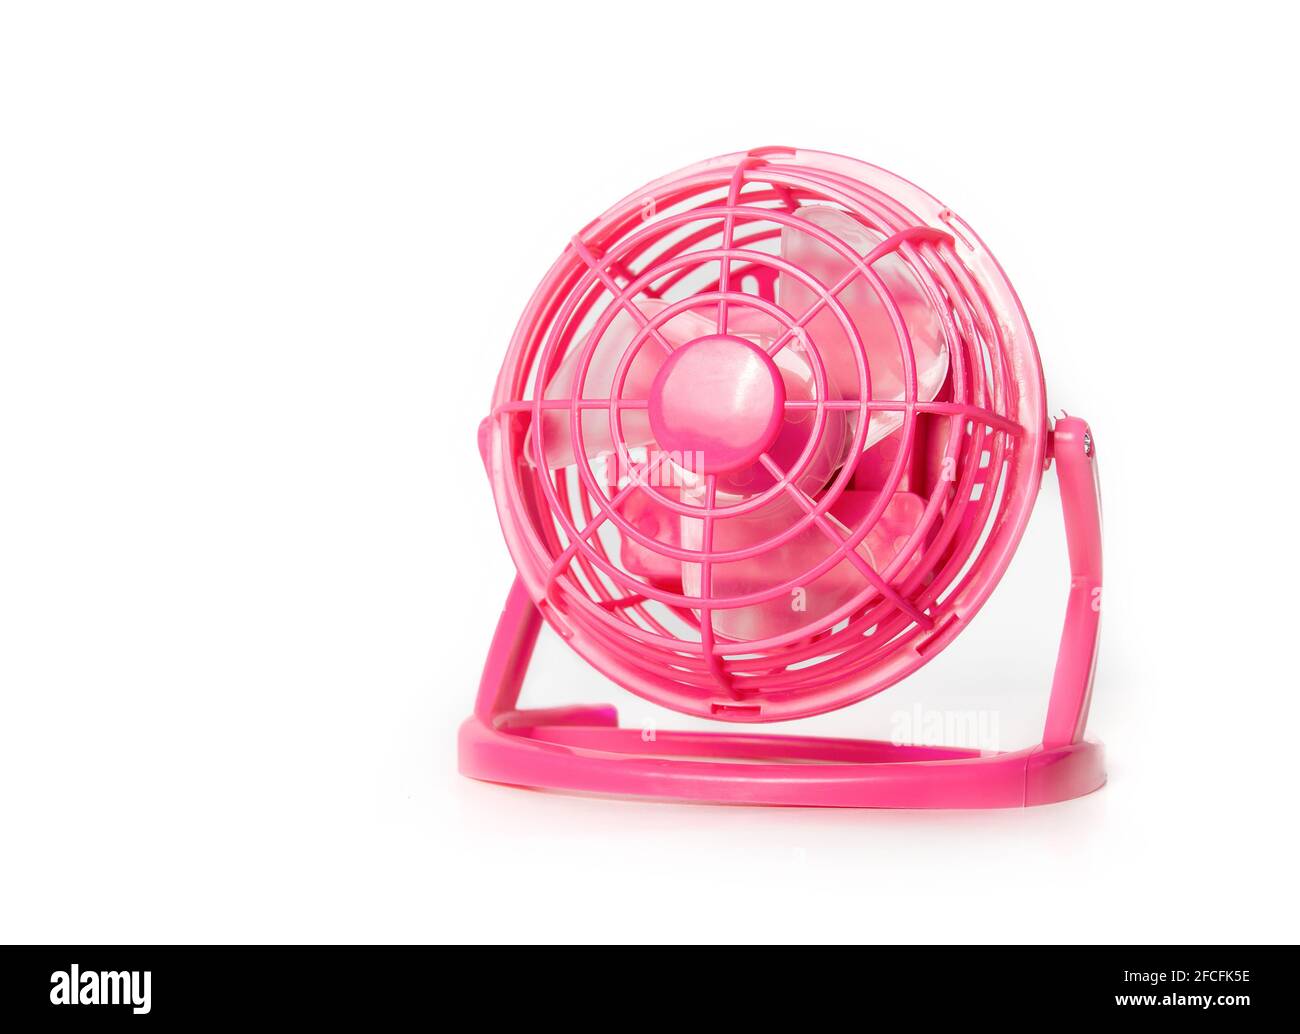 https://c8.alamy.com/comp/2FCFK5E/mini-fan-portable-battery-operated-hot-pink-small-table-ventilator-to-cool-down-and-circulate-air-during-hot-summer-days-use-at-the-office-car-trip-2FCFK5E.jpg